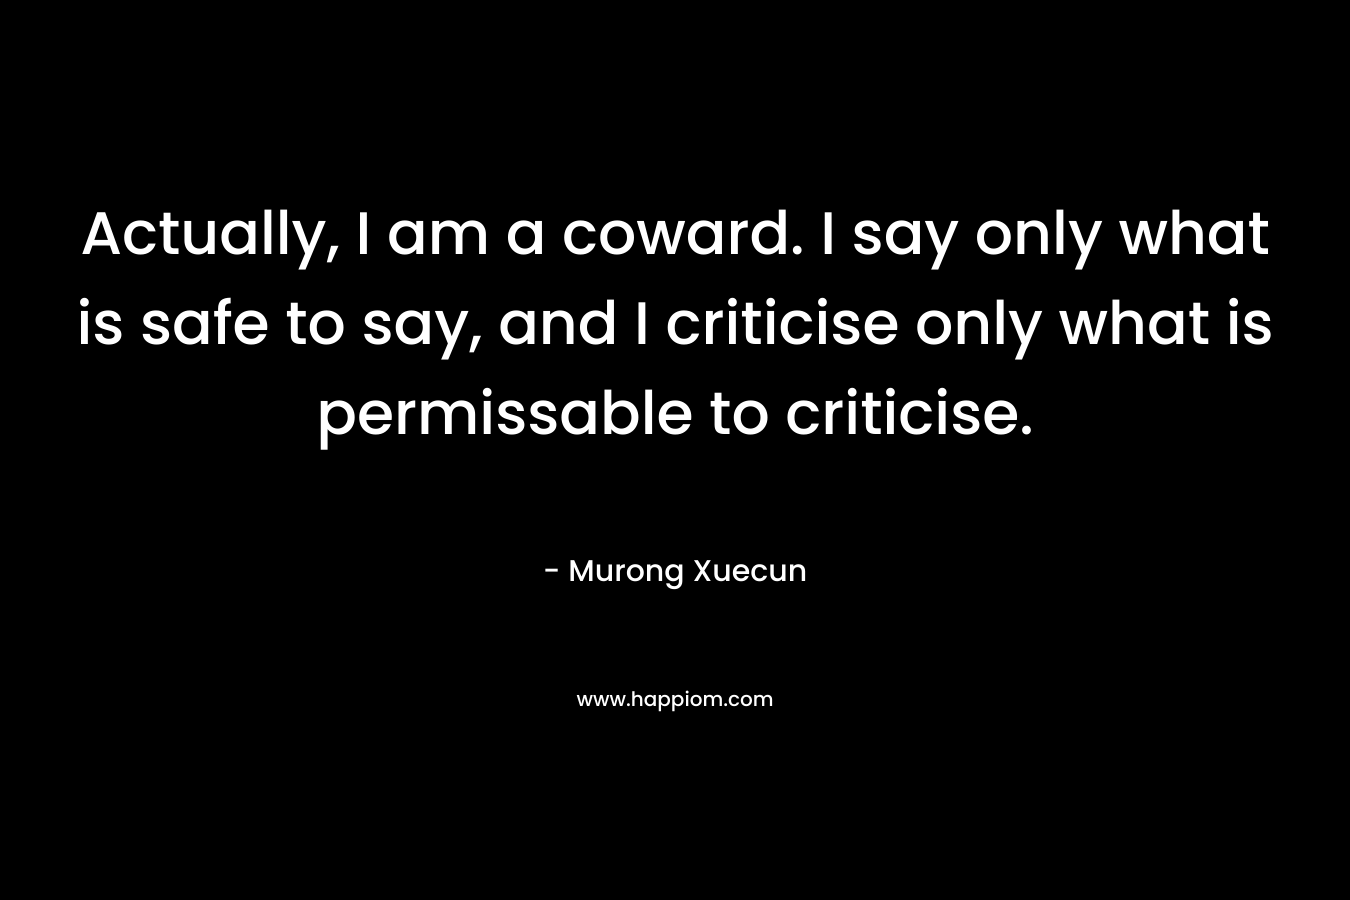 Actually, I am a coward. I say only what is safe to say, and I criticise only what is permissable to criticise. – Murong Xuecun